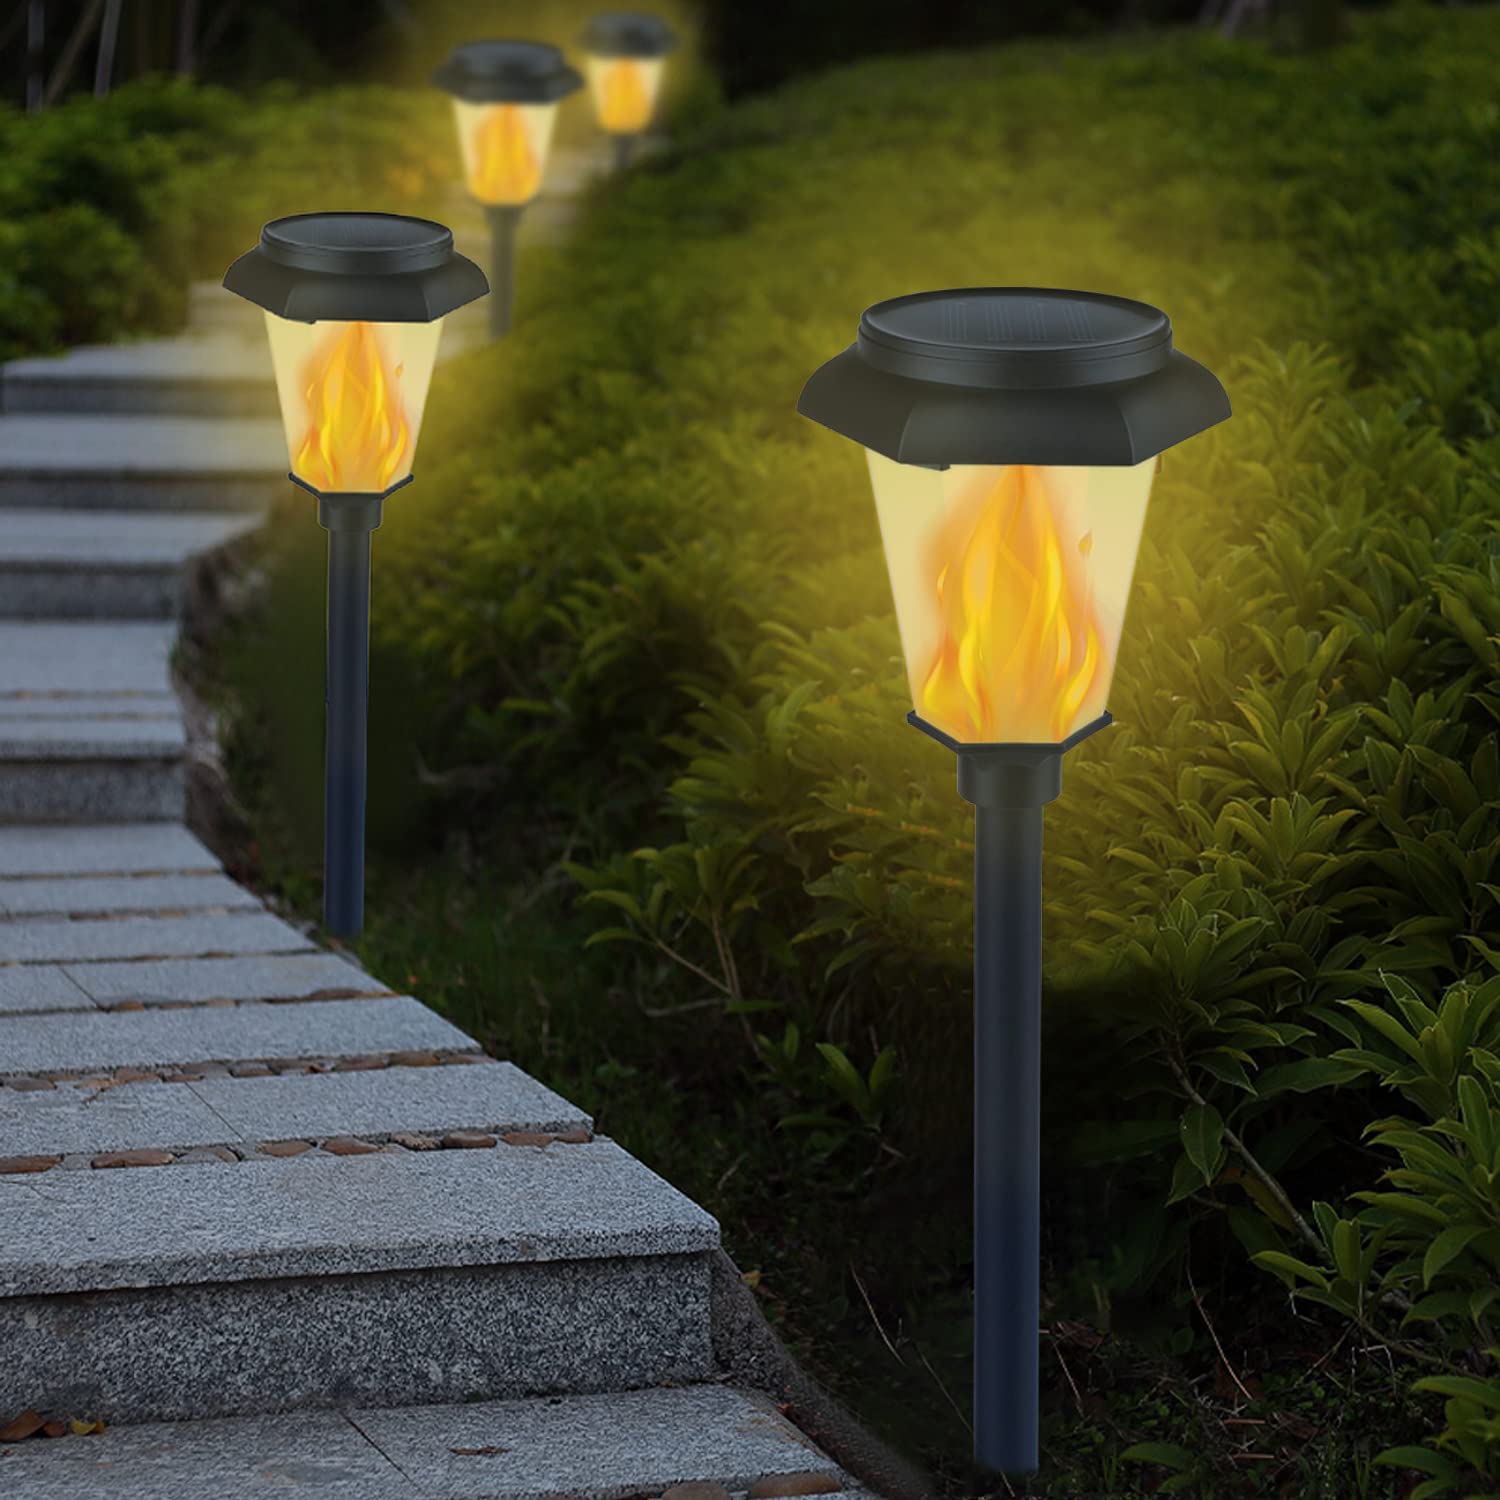 COOLWEST Solar Garden Lights Outdoor, LED Torches Light with Dancing Flickering Flames, Waterproof Security Lights for Garden, Patio, Pathway, Night Party Decoration(4 Pack)